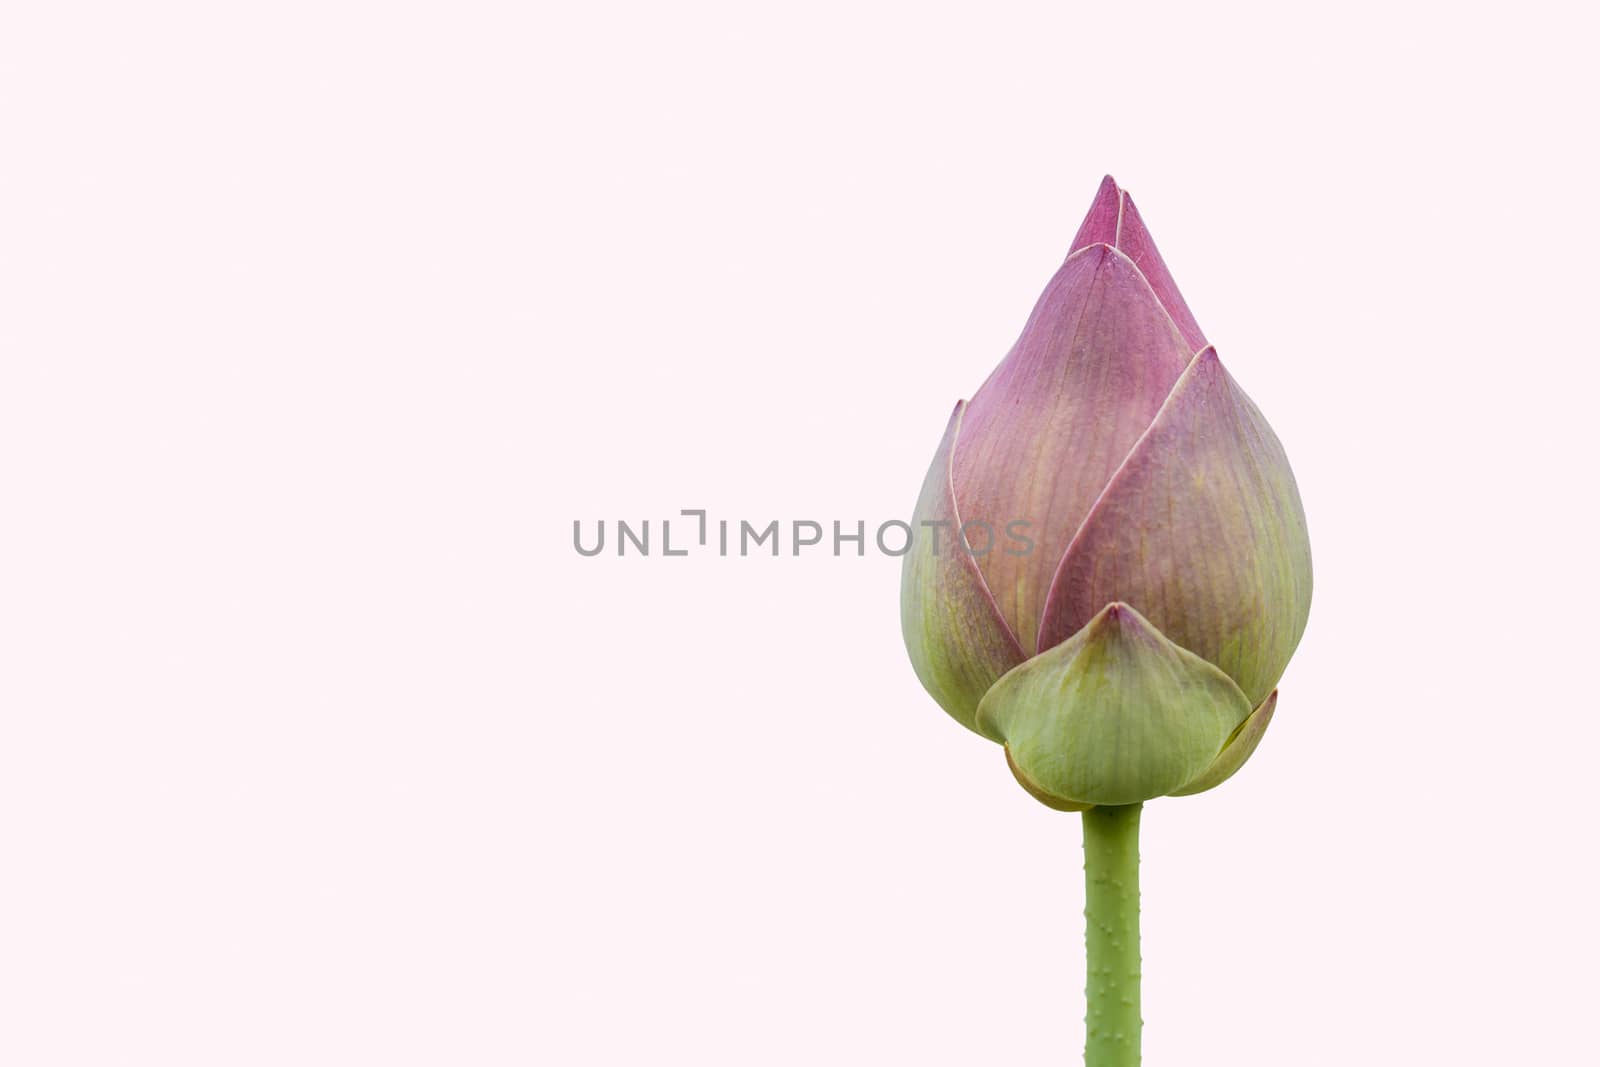 The blooming lotus buds are green on the white background, used as an illustration in agriculture and symbolic of Buddhism in Thailand.